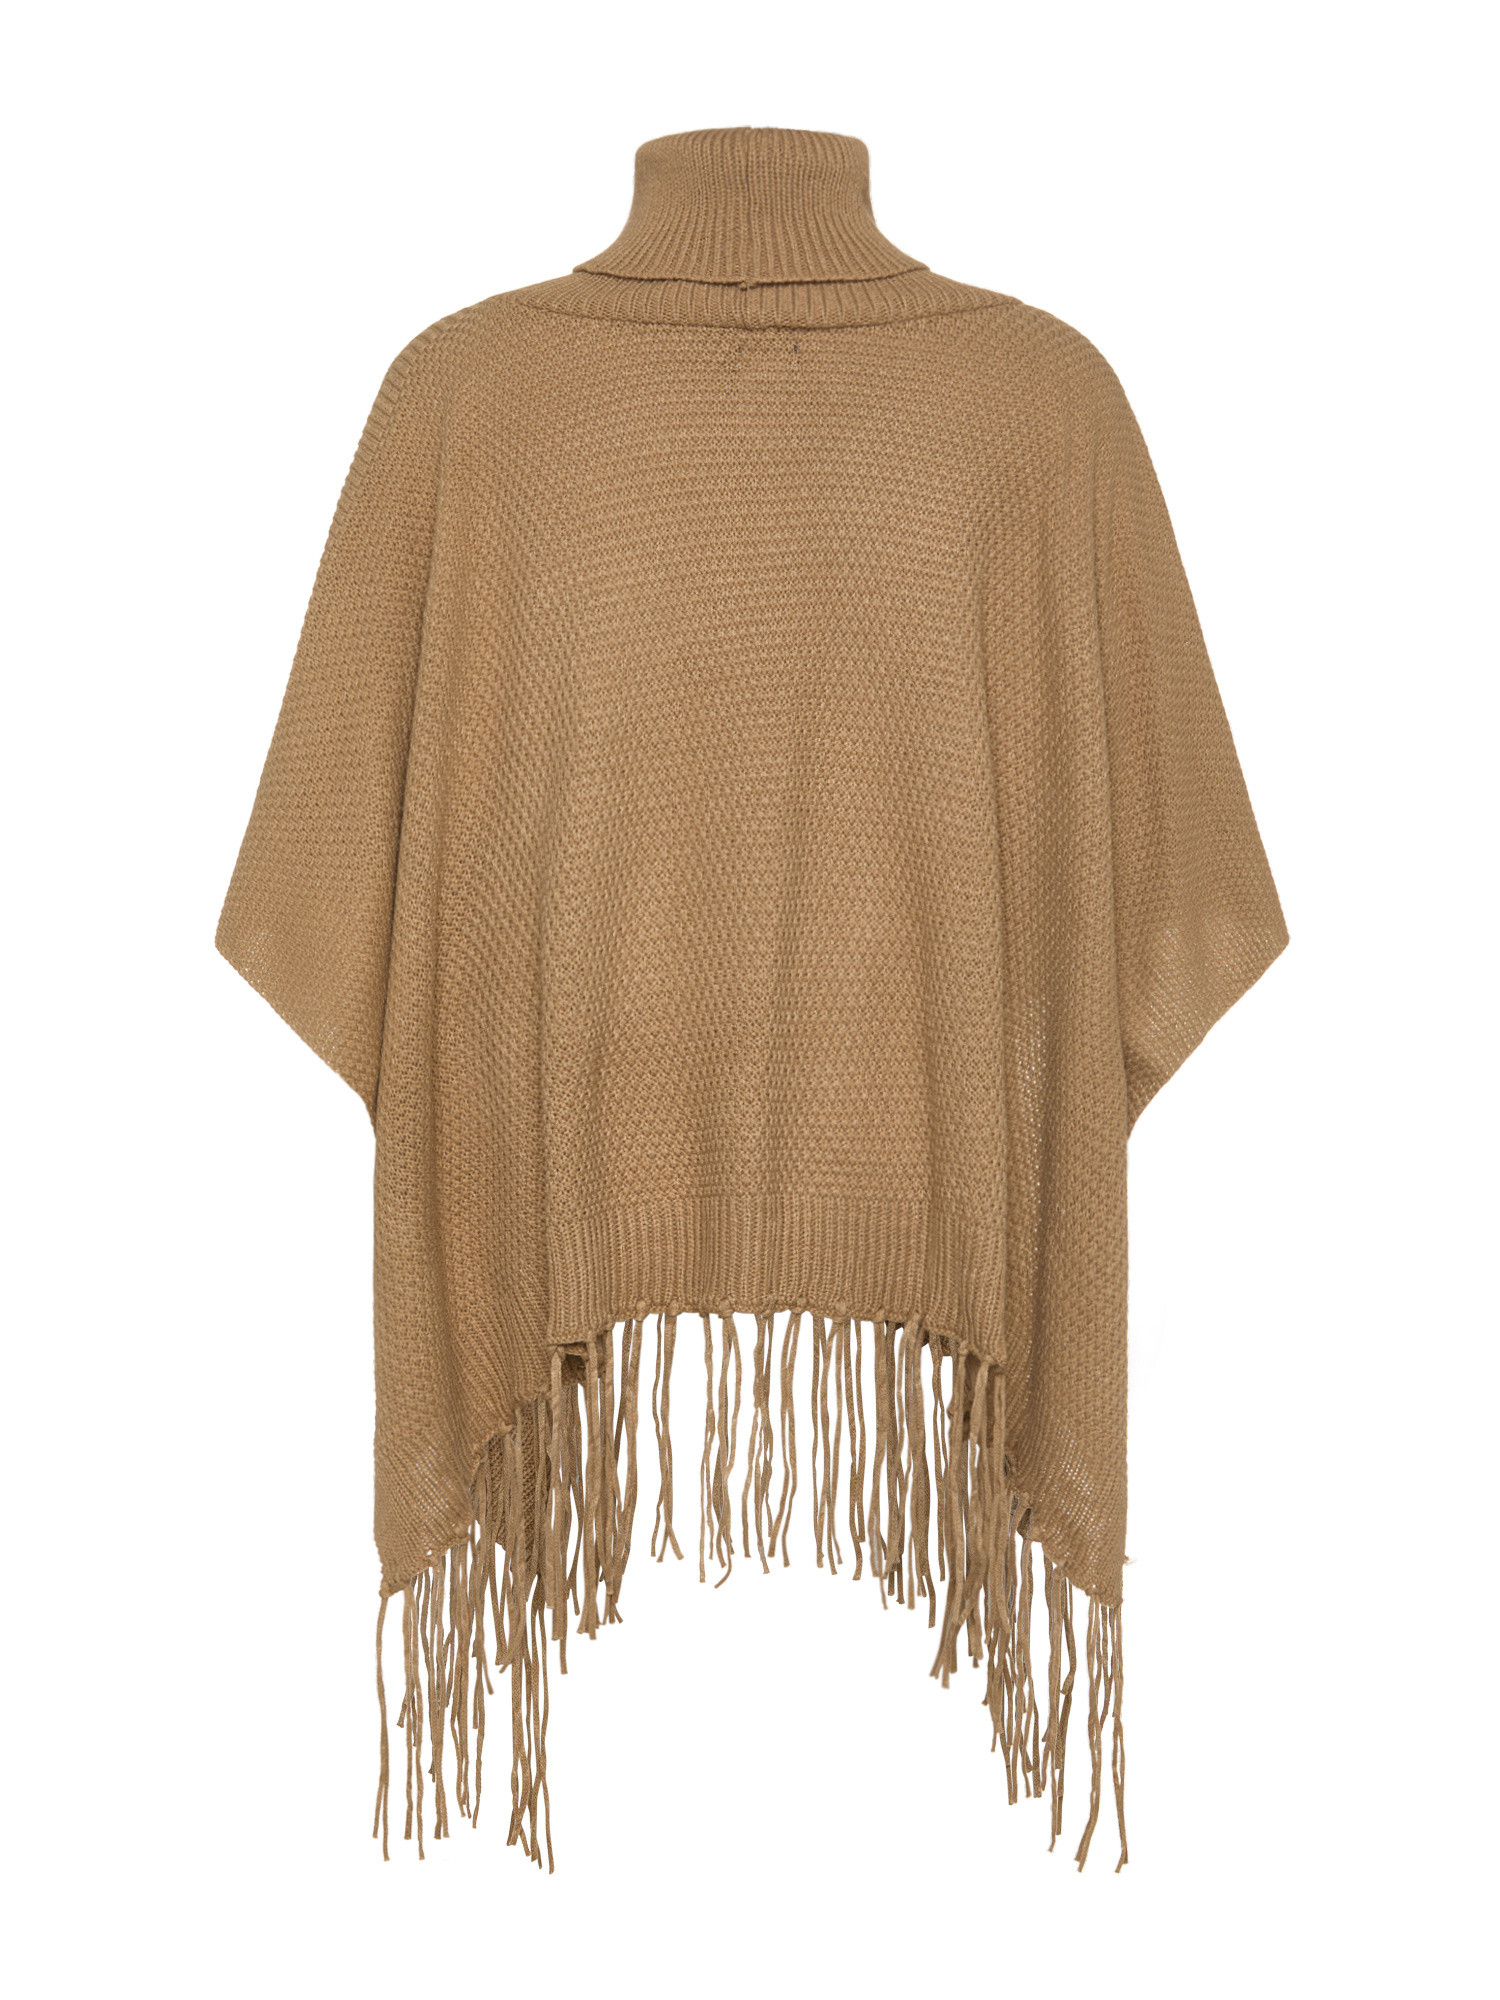 Koan - Knitted poncho, Camel, large image number 1